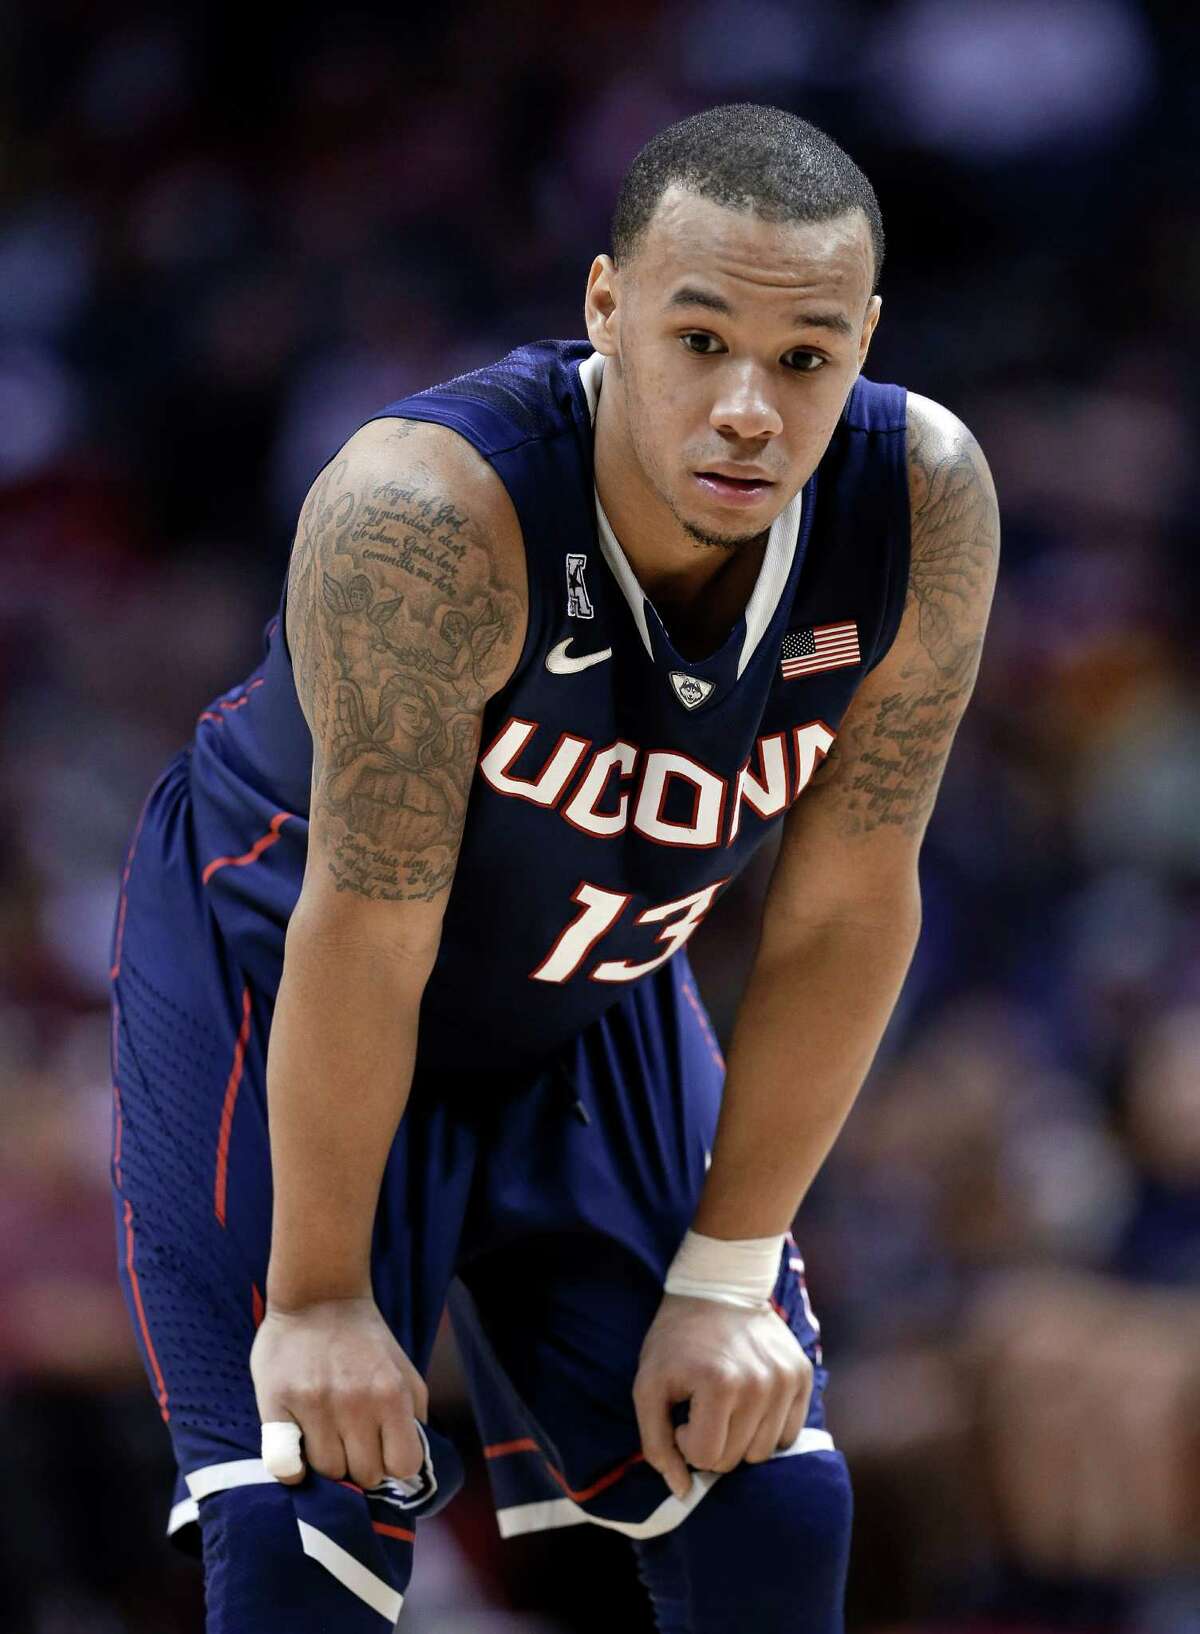 Connecticut guard Shabazz Napier waits for a player to shoot a free throw.